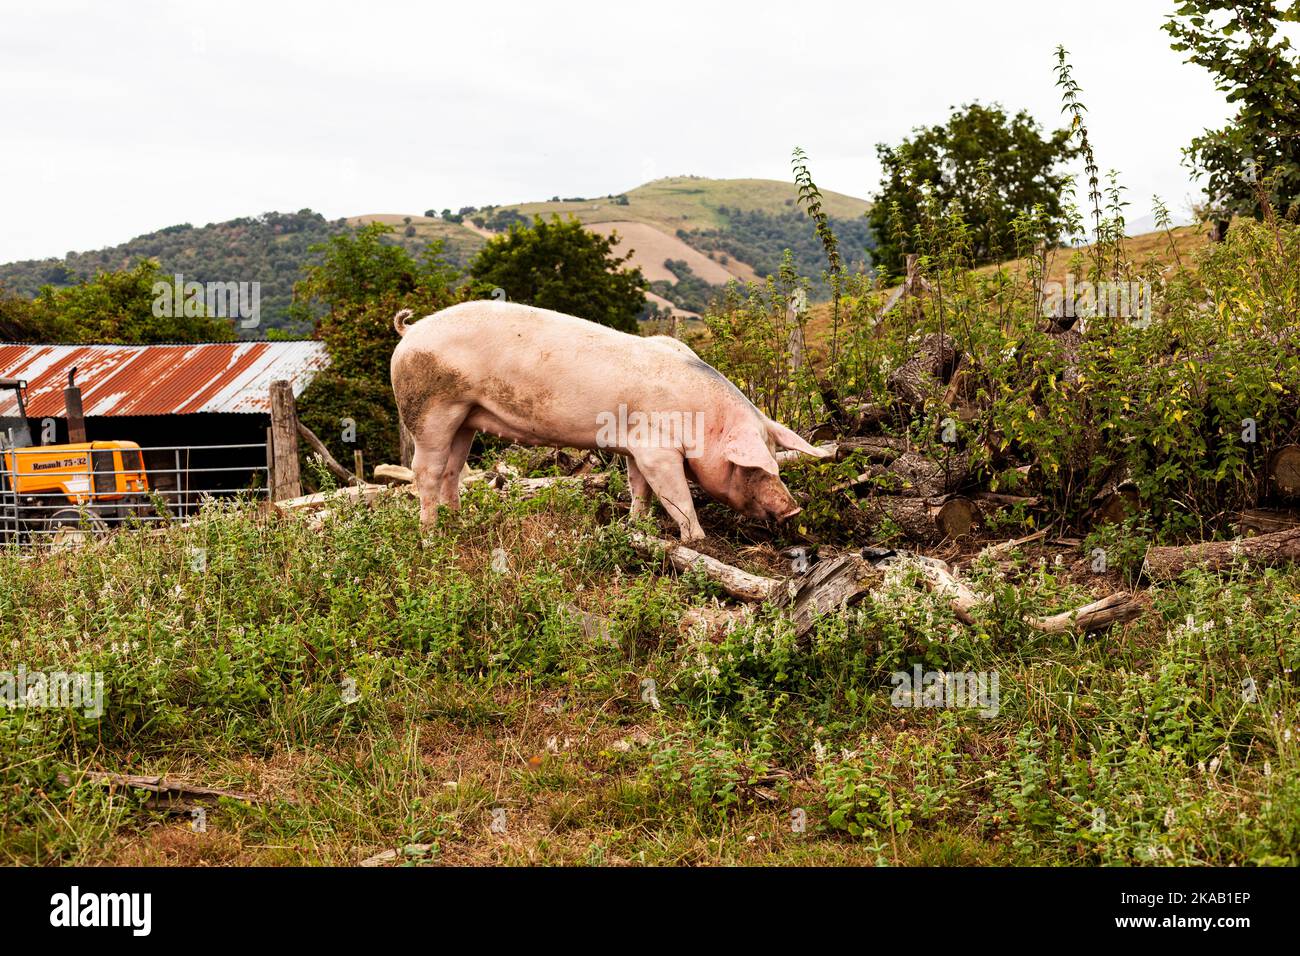 Pig eating on a meadow in an organic meat farm, France Stock Photo